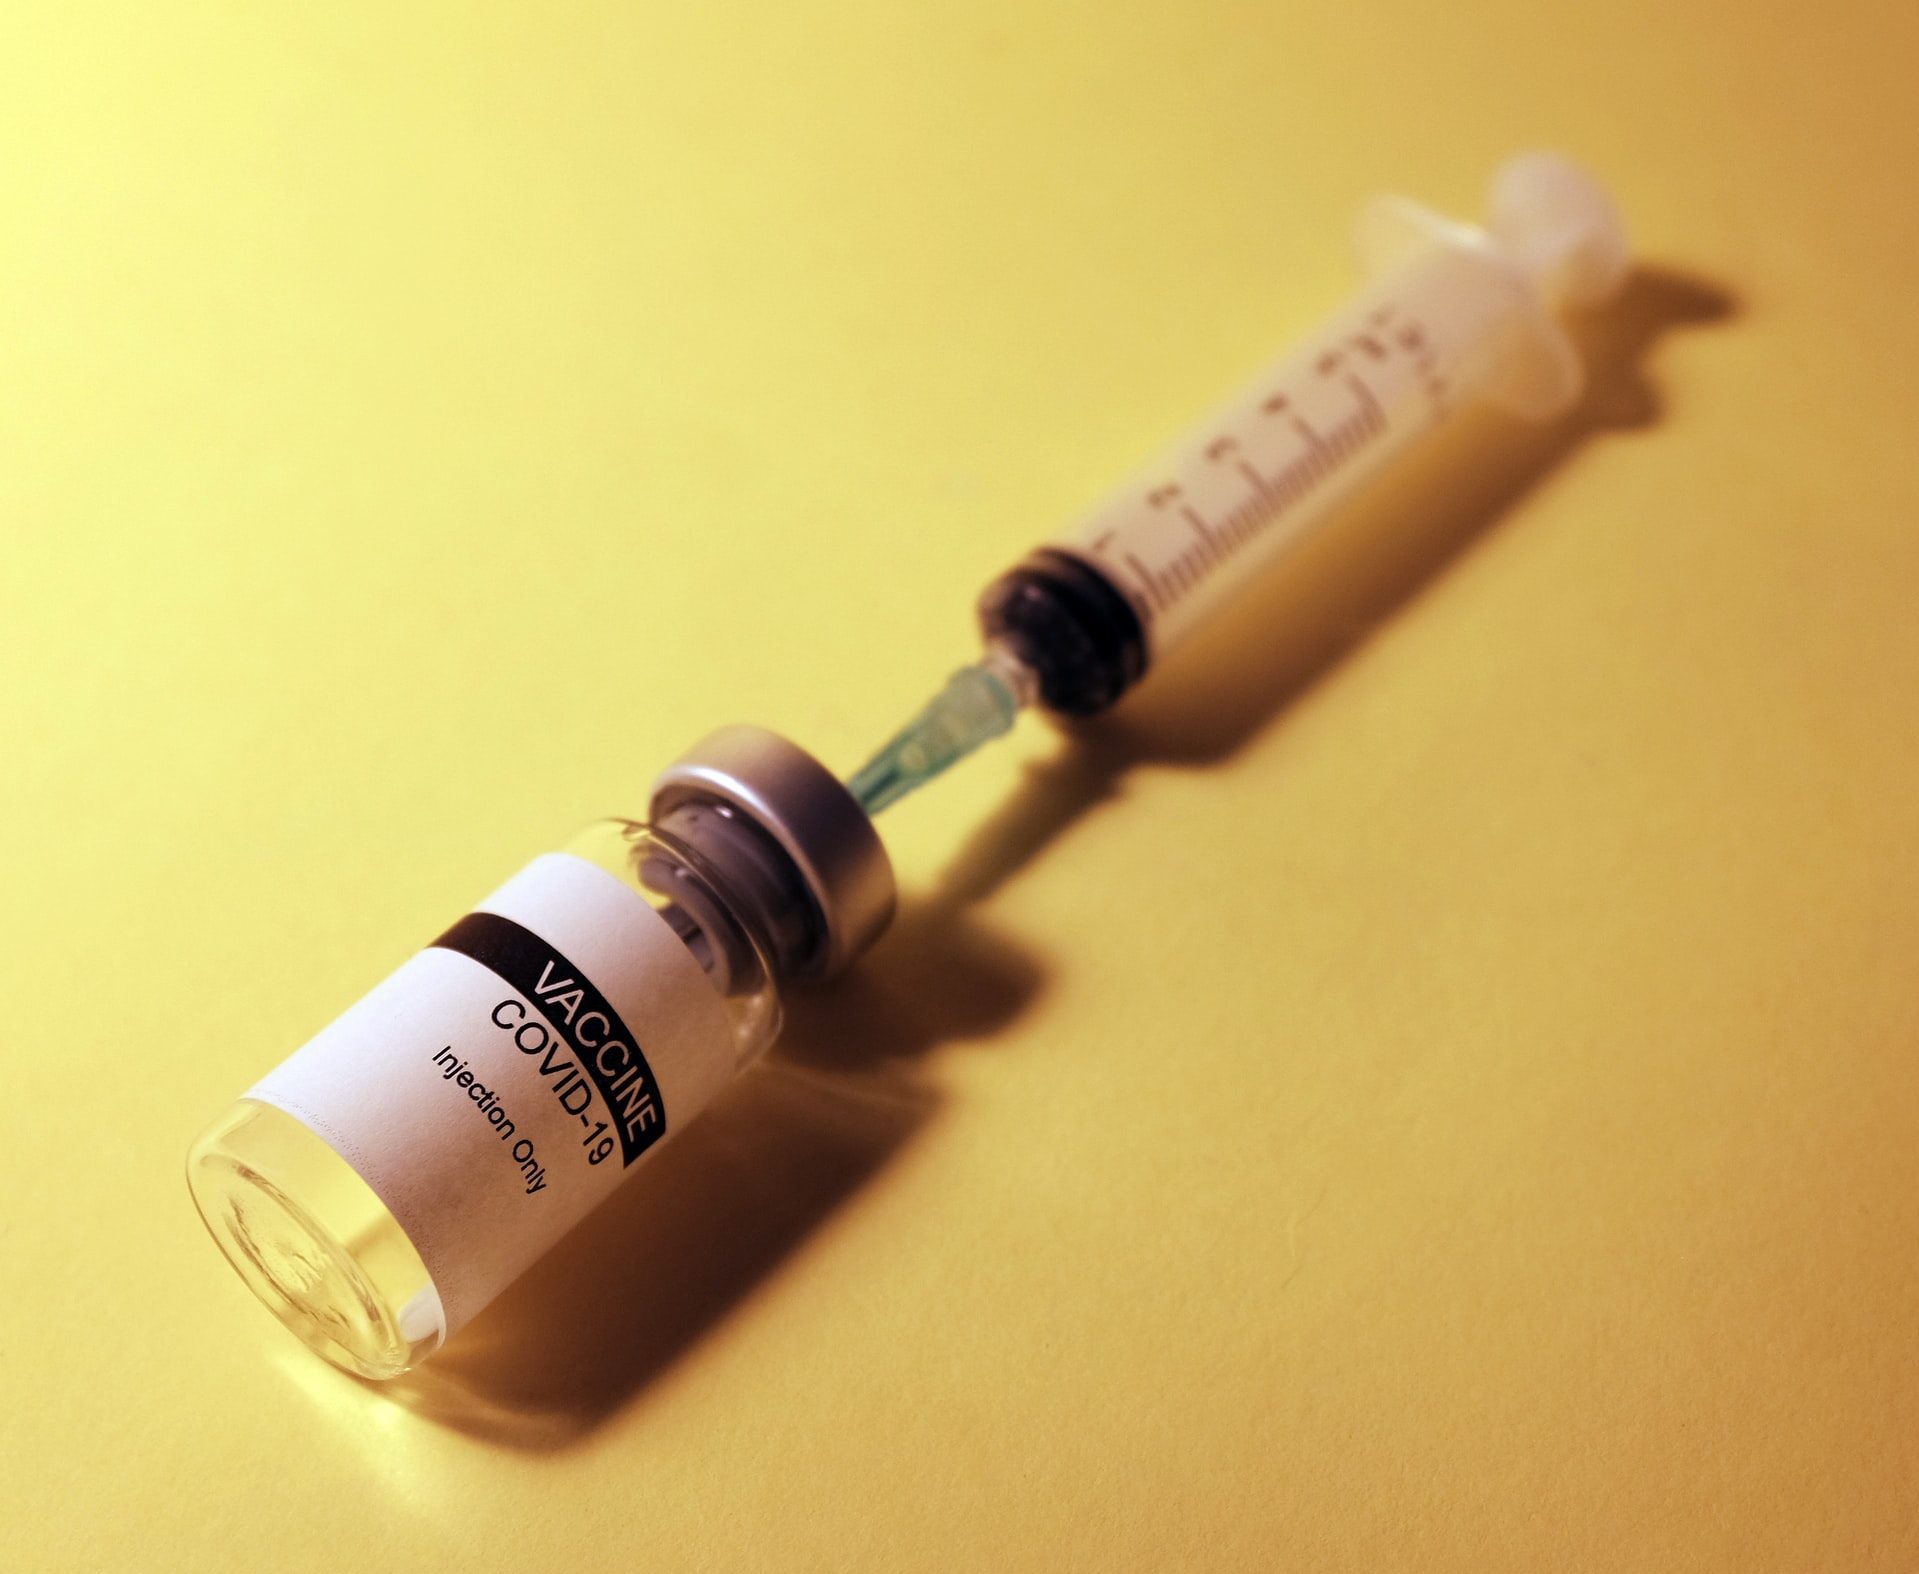 Covid vaccine injection